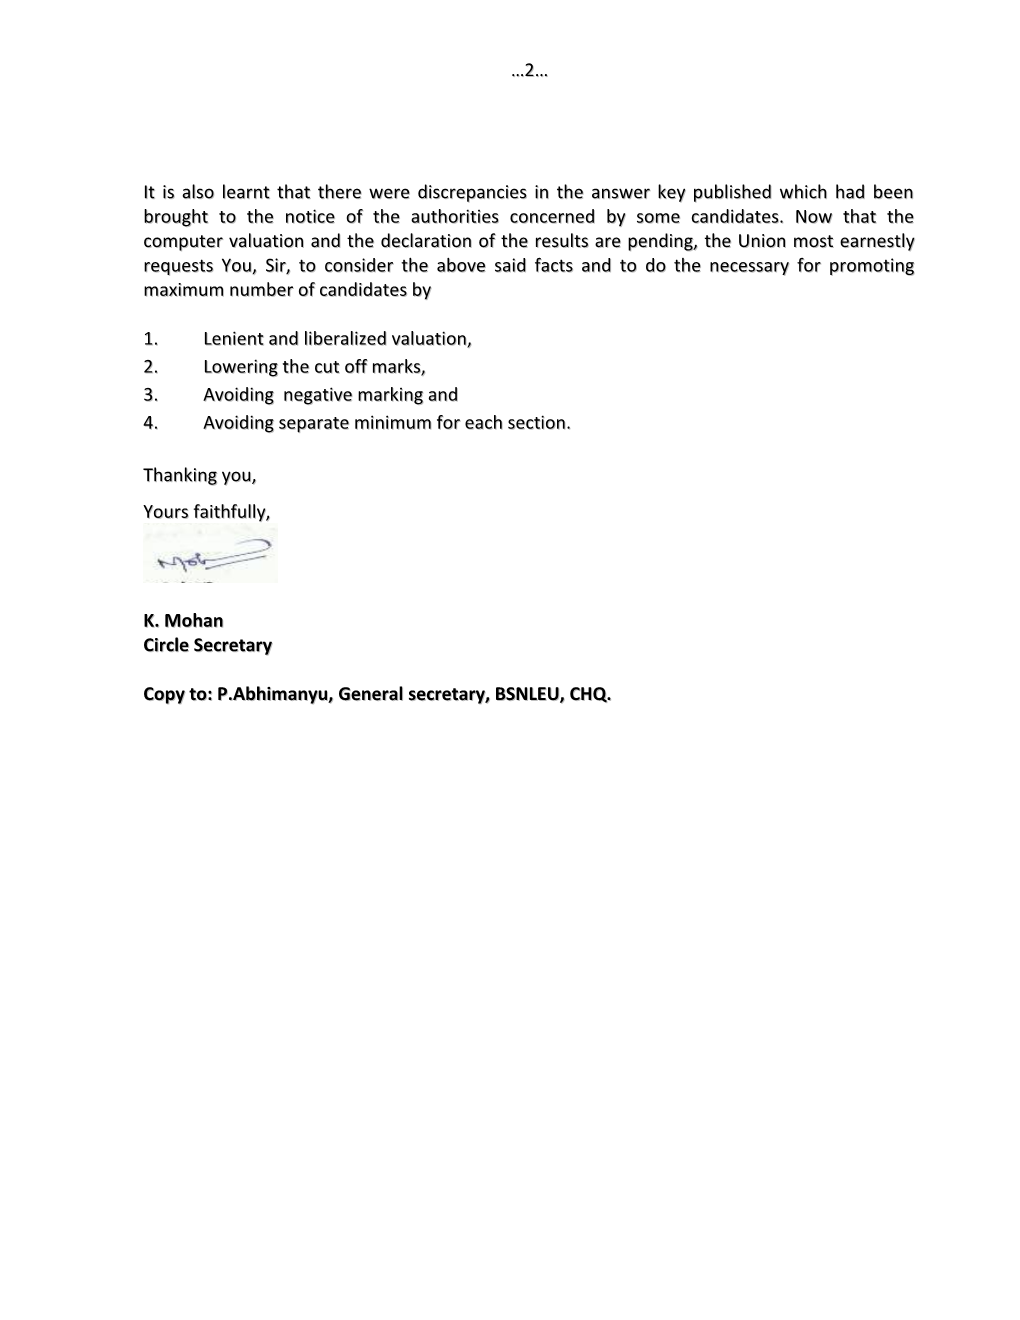 Sub:- JTO LICE Held on 02/06/2013 - Request for Liberalized Valuation